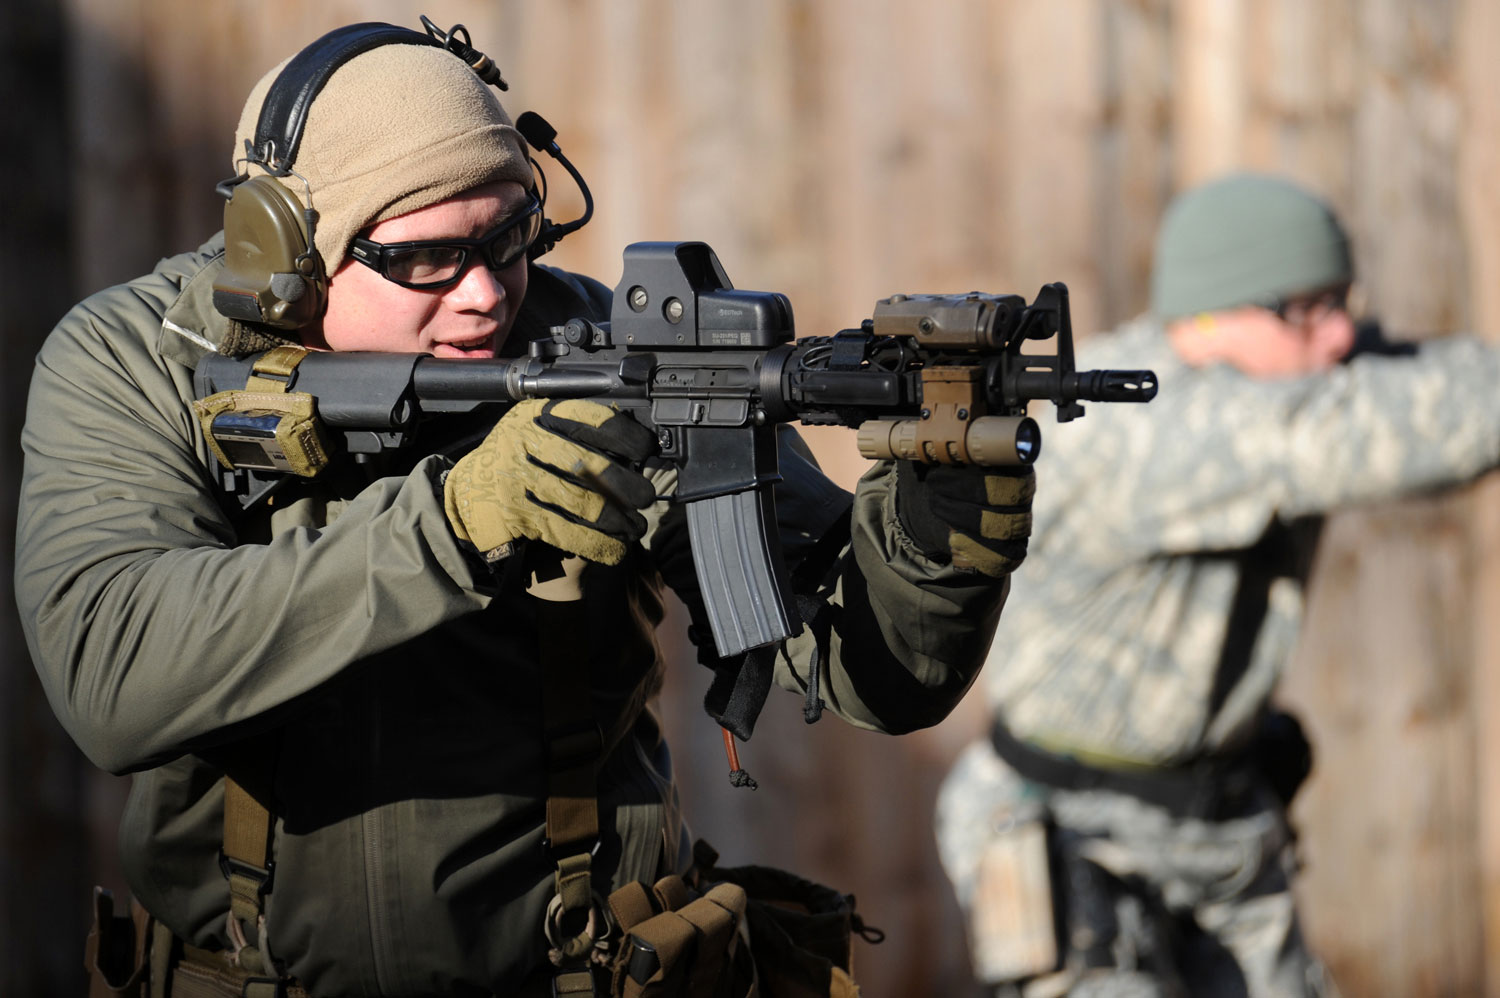 10th Special Forces Group | CQBR Training